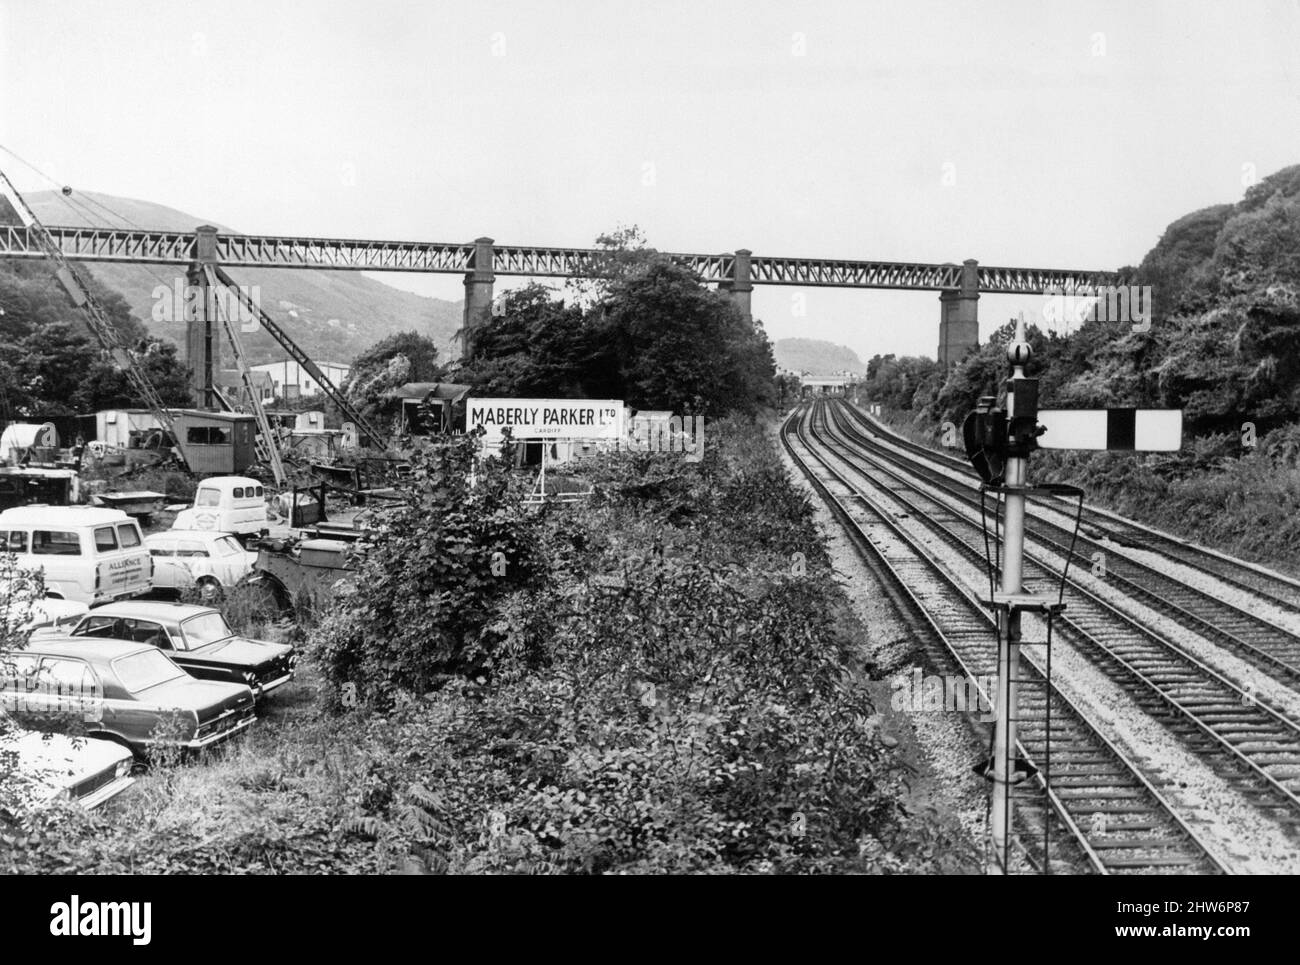 Walnut Tree Viaduct, a railway viaduct located above the southern edge of the village of Taffs Well, Cardiff, South Wales, Friday 20th September 1968. Made of Brick columns and Steel lattice girders spans.  Maberly Parker Limited. Stock Photo